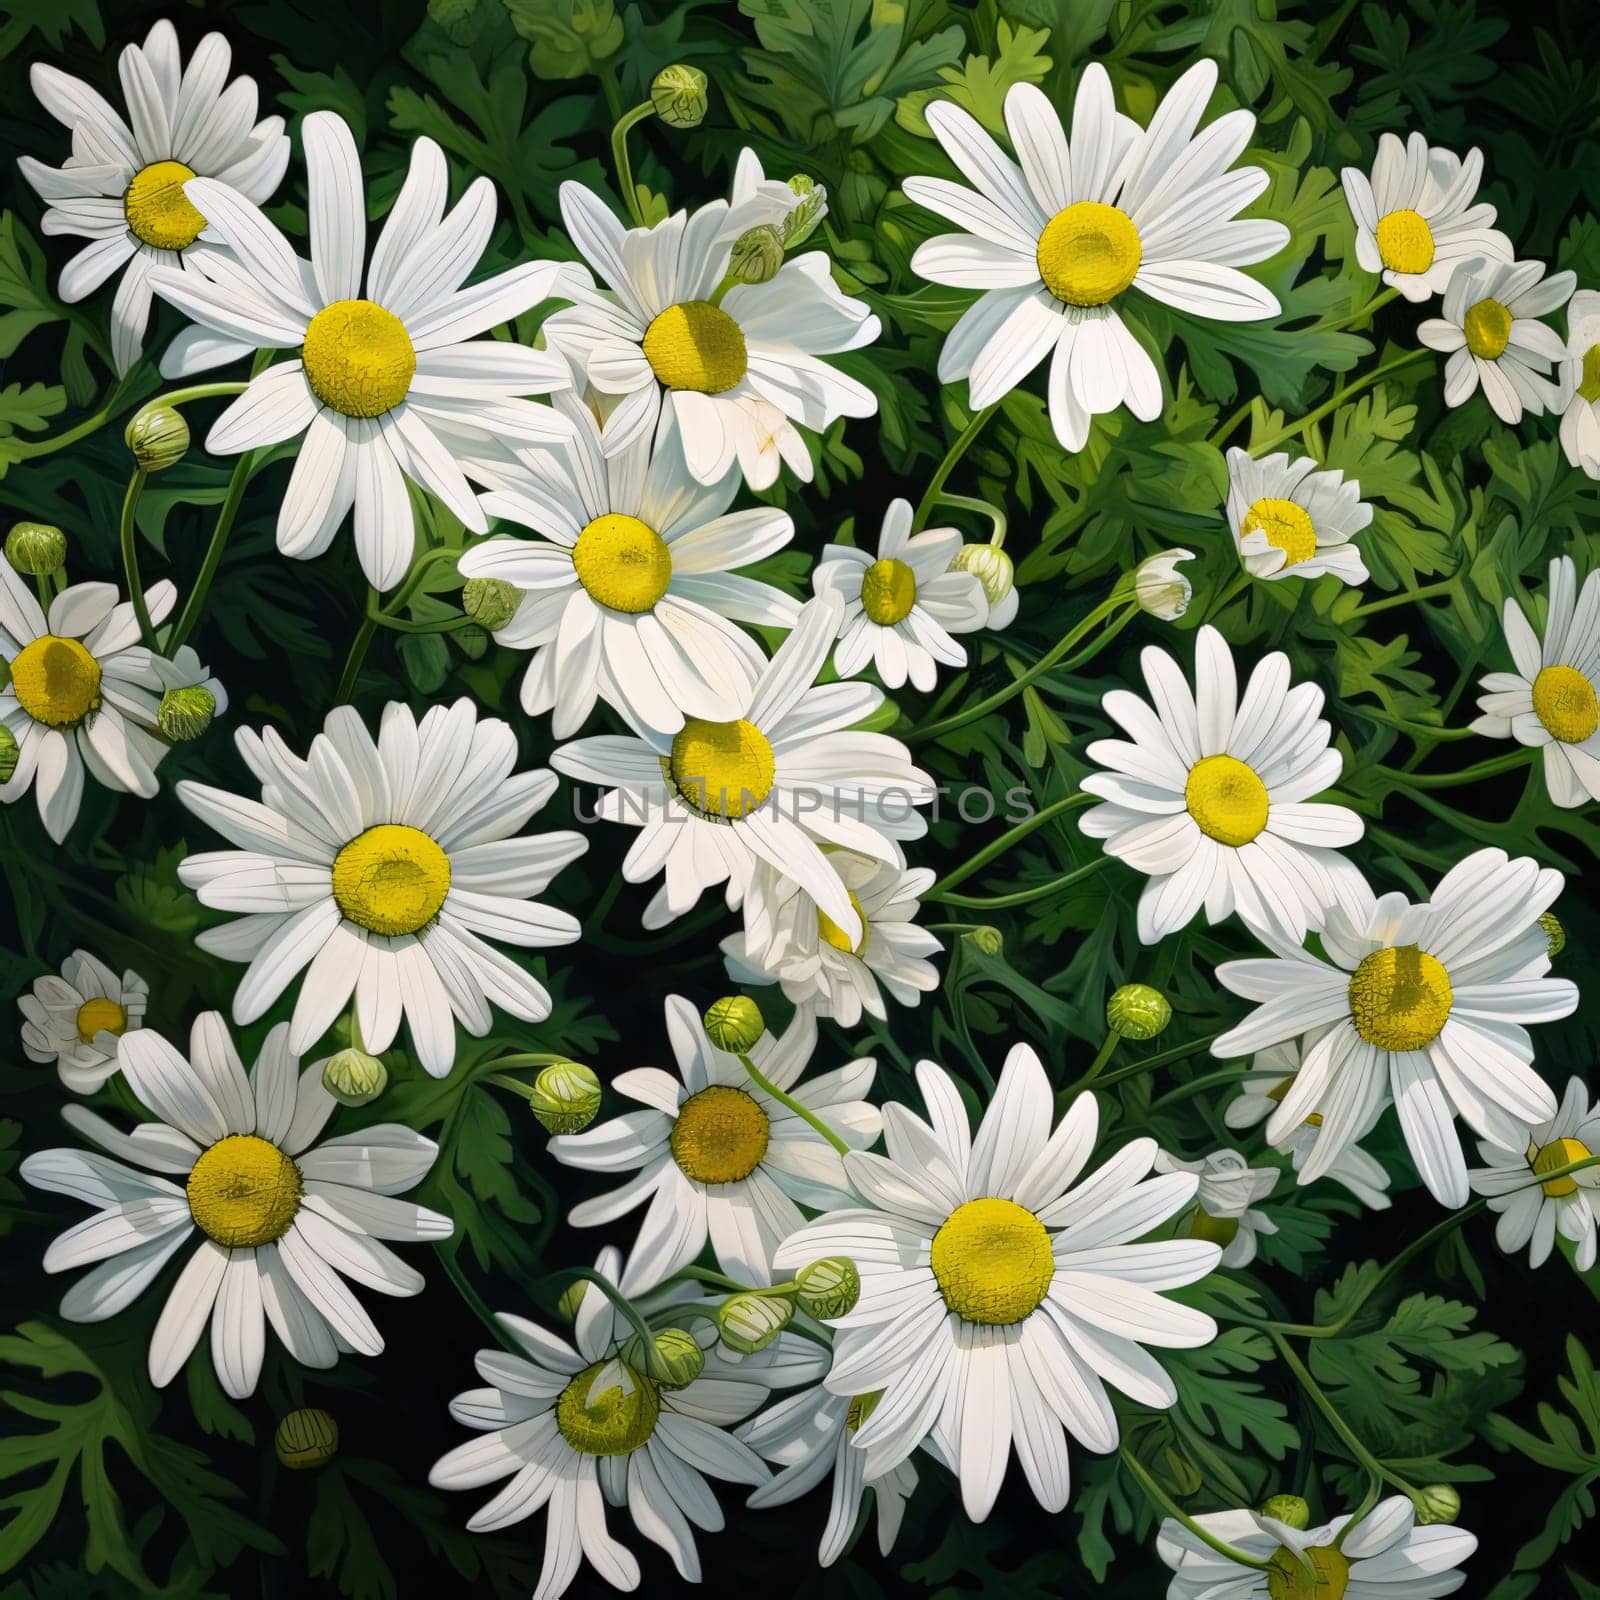 White daisies with green leaves in a field, close-up view. Flowering flowers, a symbol of spring, new life. by ThemesS